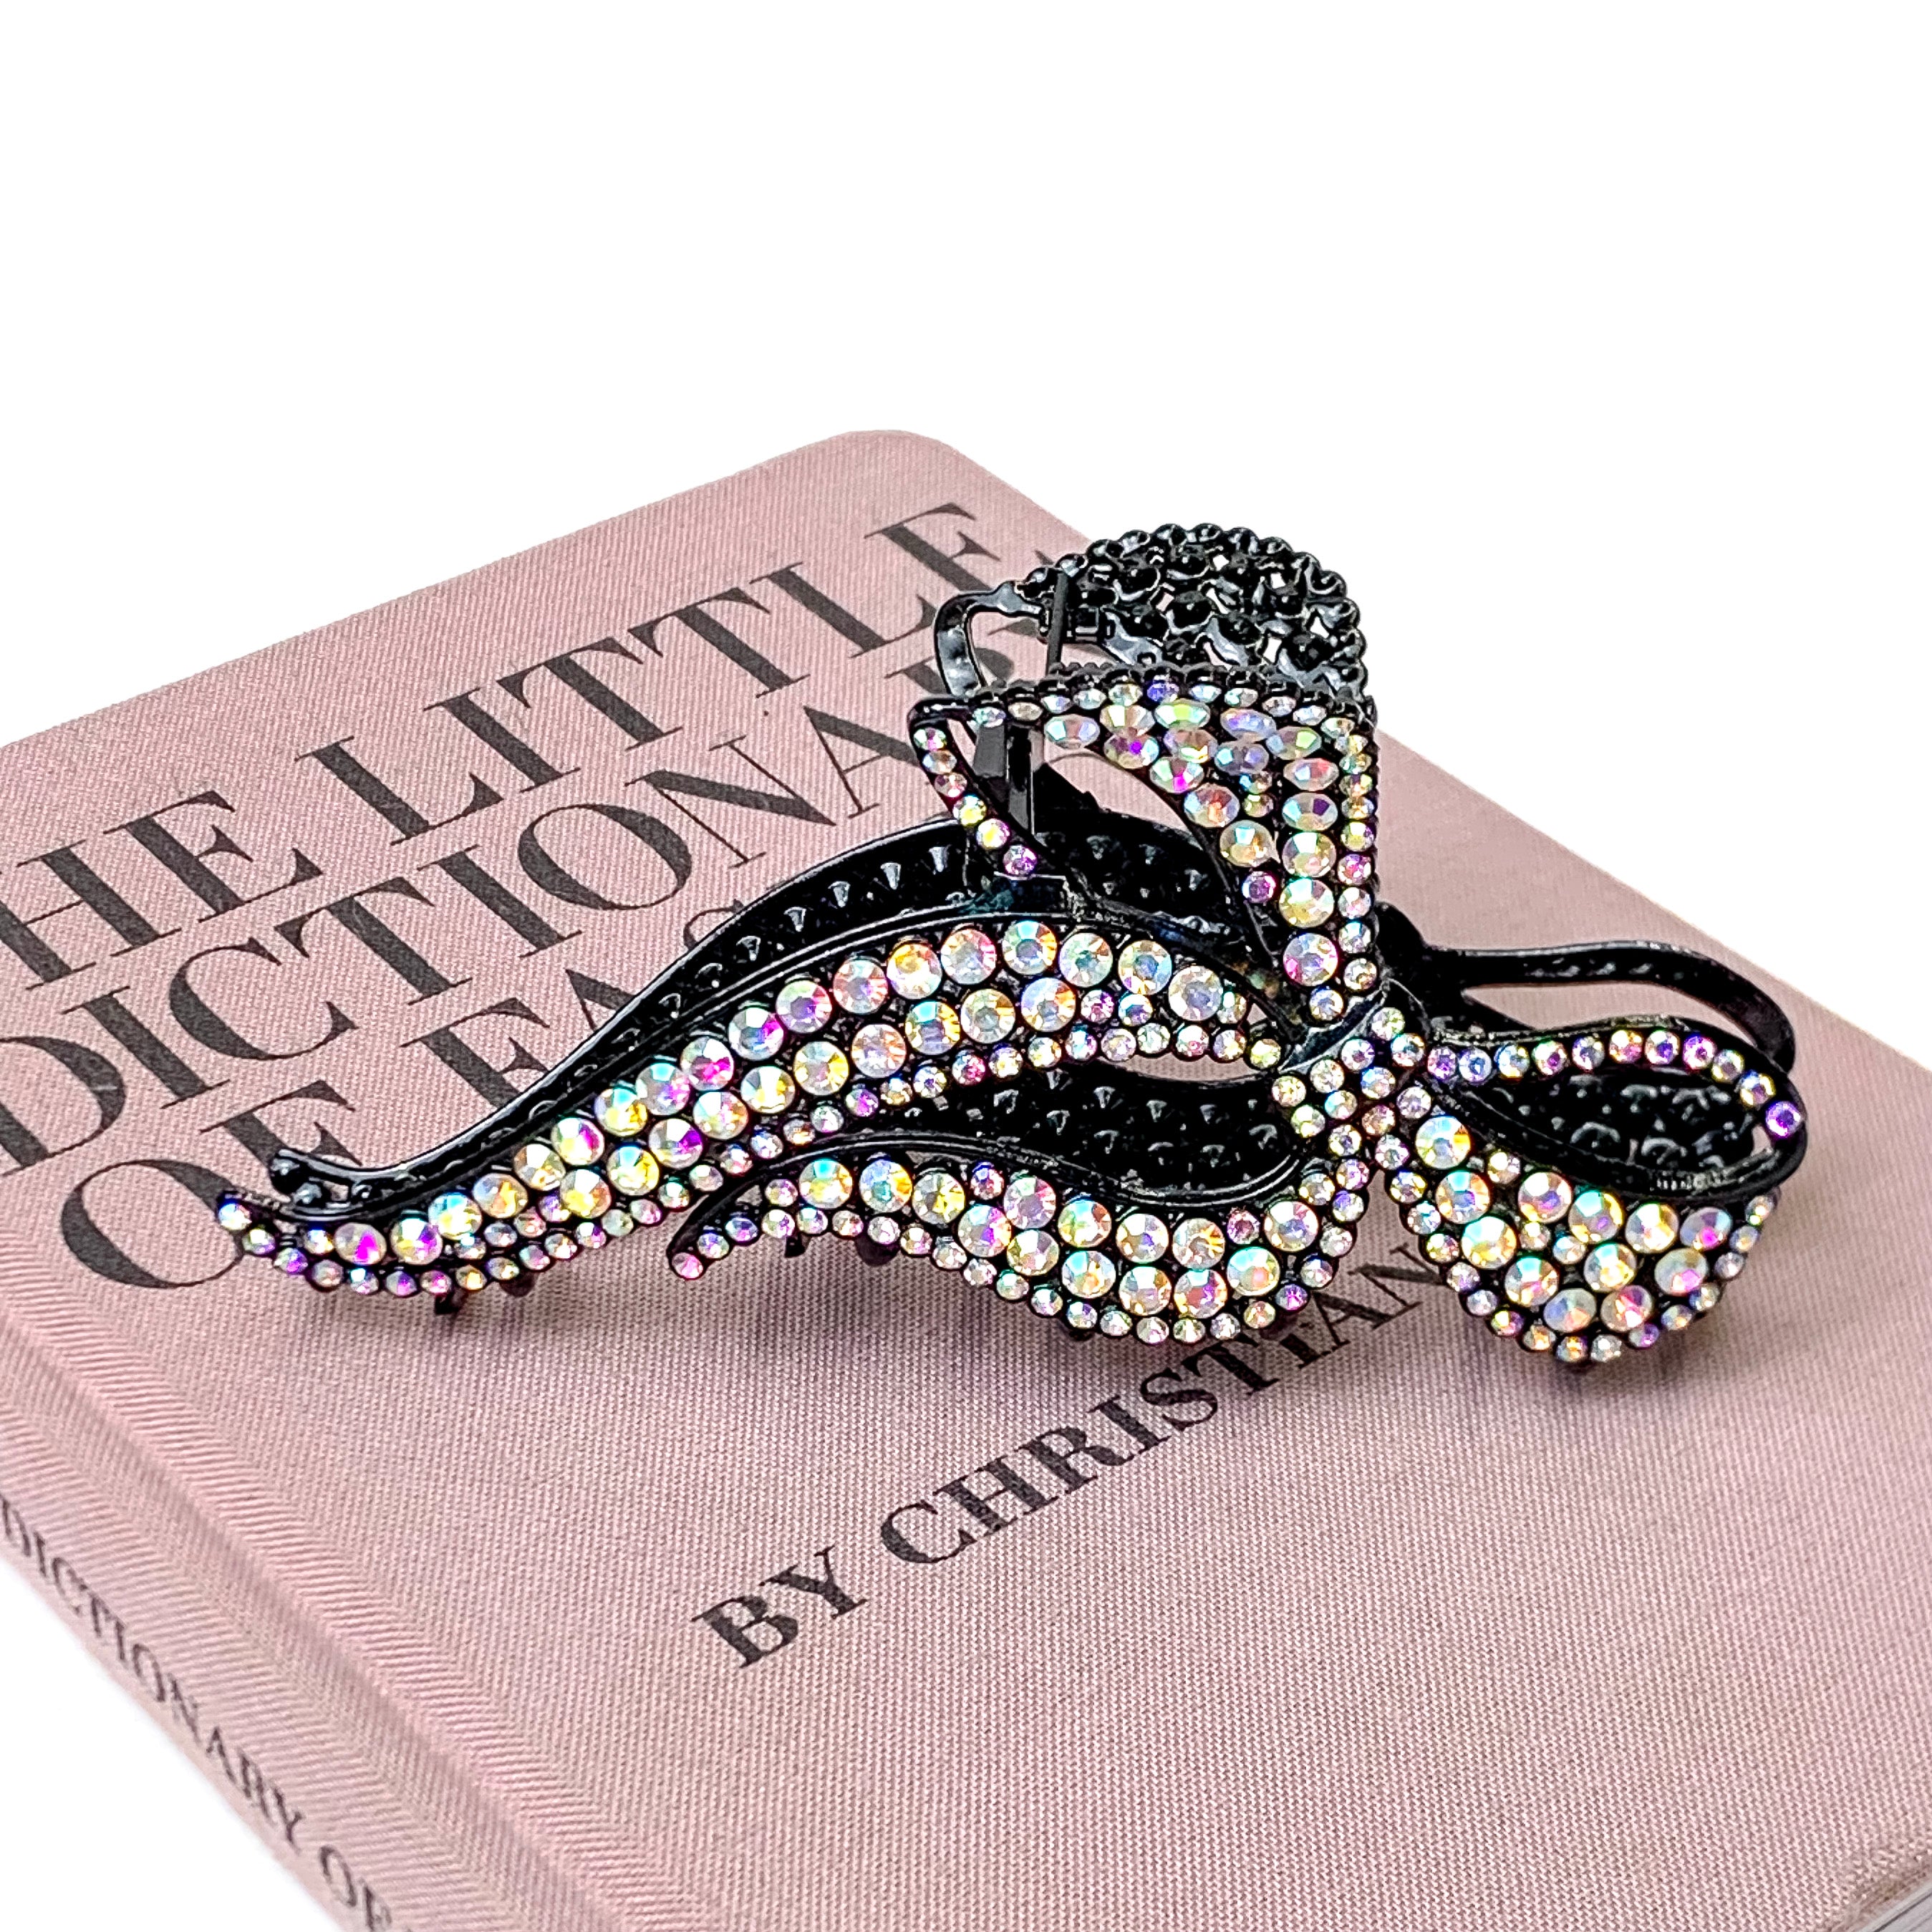 AB Crystal Embellished Bow Shaped Metal Hair Clip in Black - Giddy Up Glamour Boutique